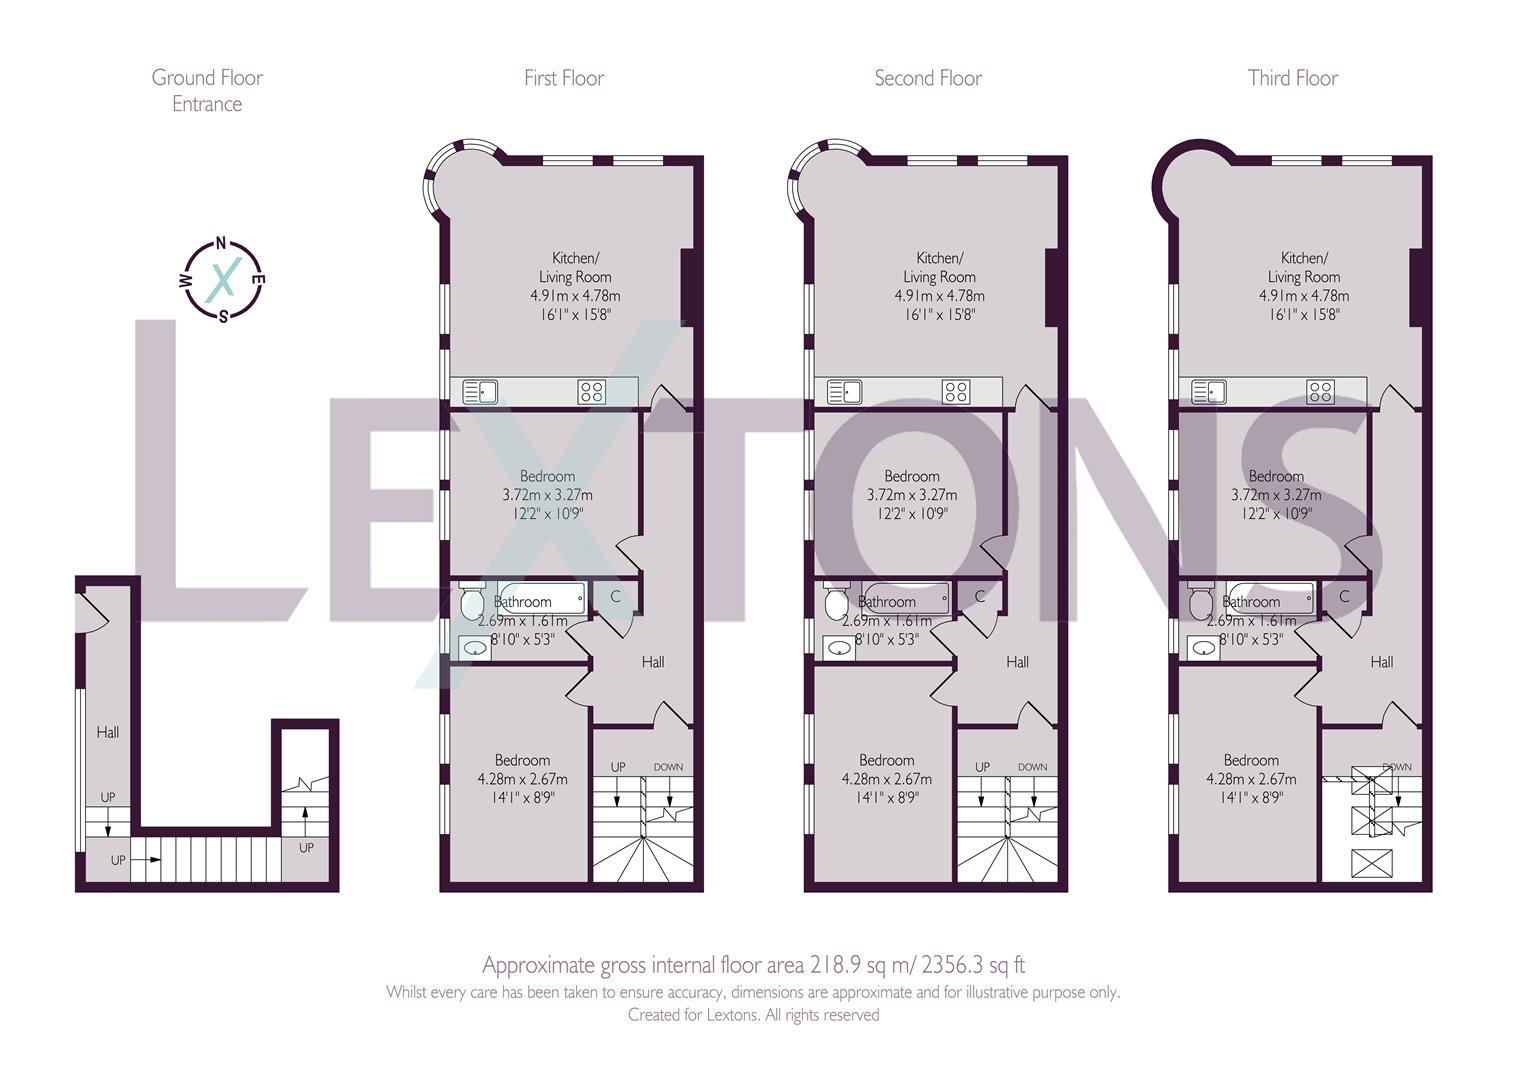 Floorplans For Western Road, Hove